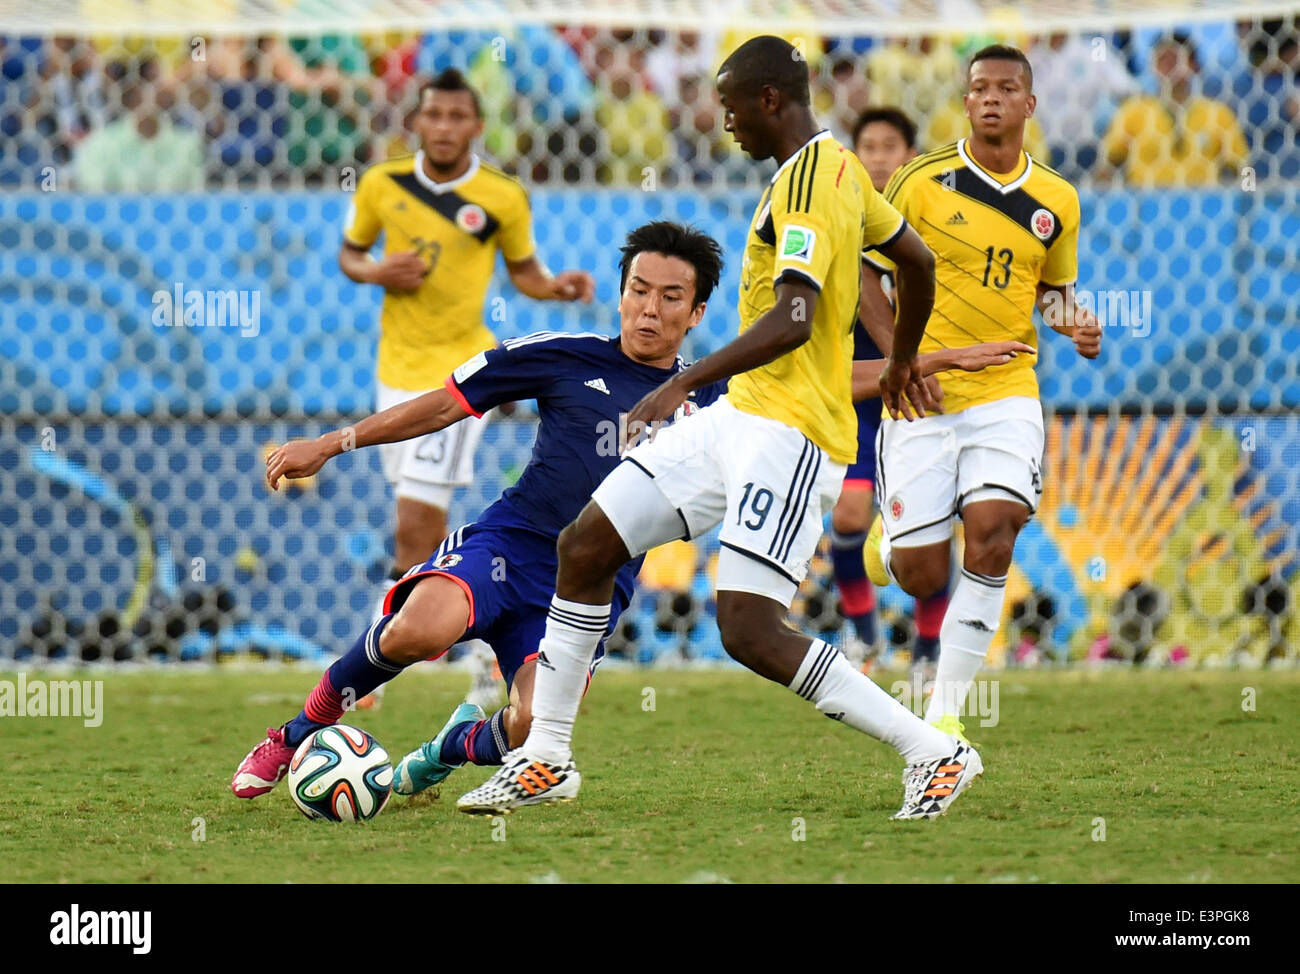 (140624) -- CUIABA, June 24, 2014 (Xinhua) -- Japan's Makoto Hasebe vies with Colombia's Adrian Ramos during a Group C match between Japan and Colombia of 2014 FIFA World Cup at the Arena Pantanal Stadium in Cuiaba, Brazil, June 24, 2014. (Xinhua/Liu Dawei) Stock Photo